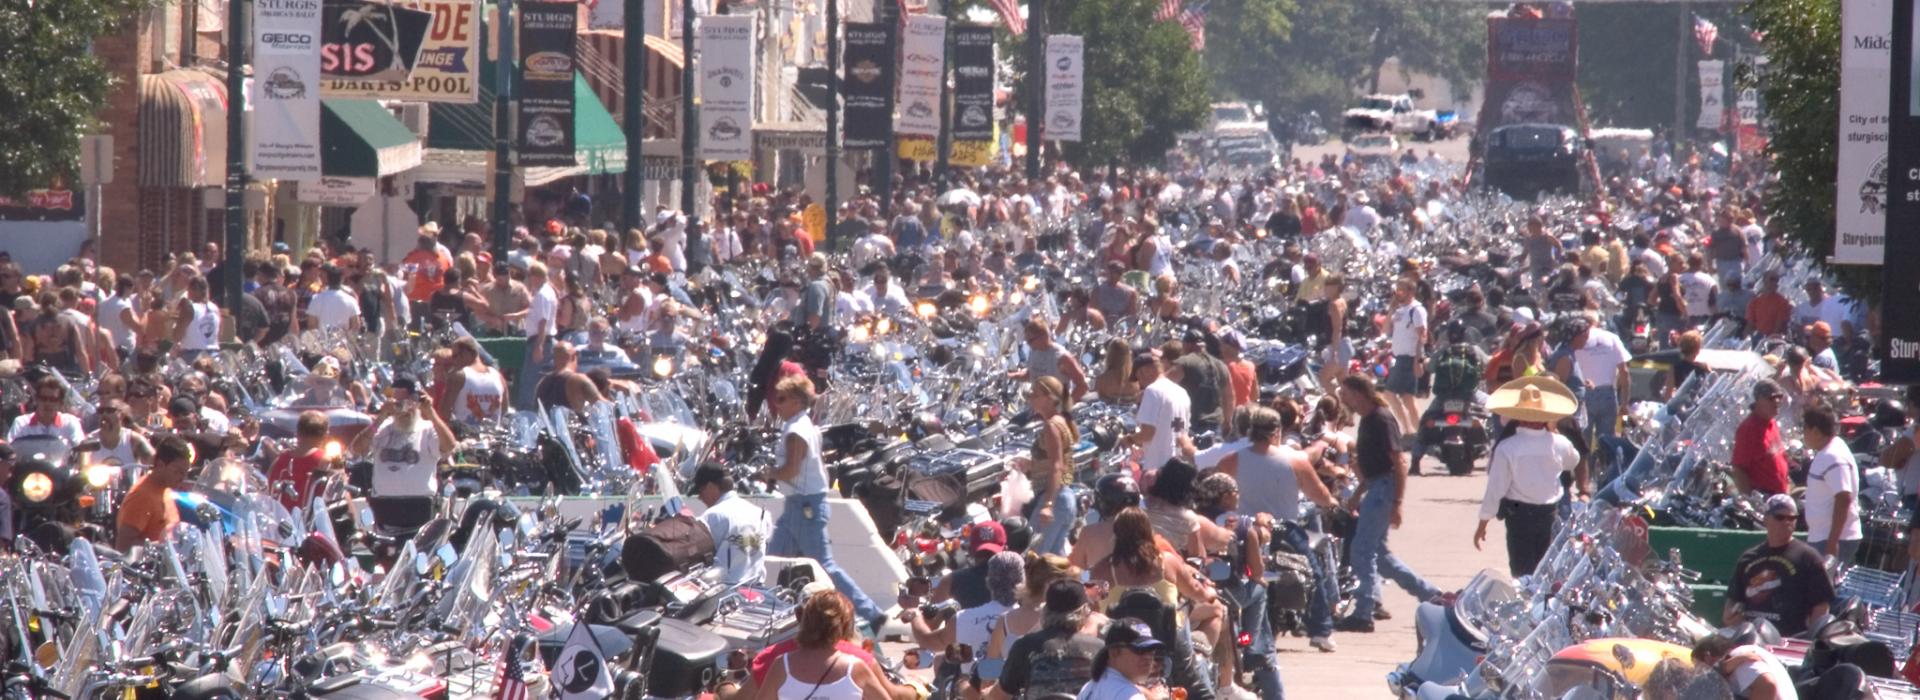 Sturgis Rally Rates & Reservations